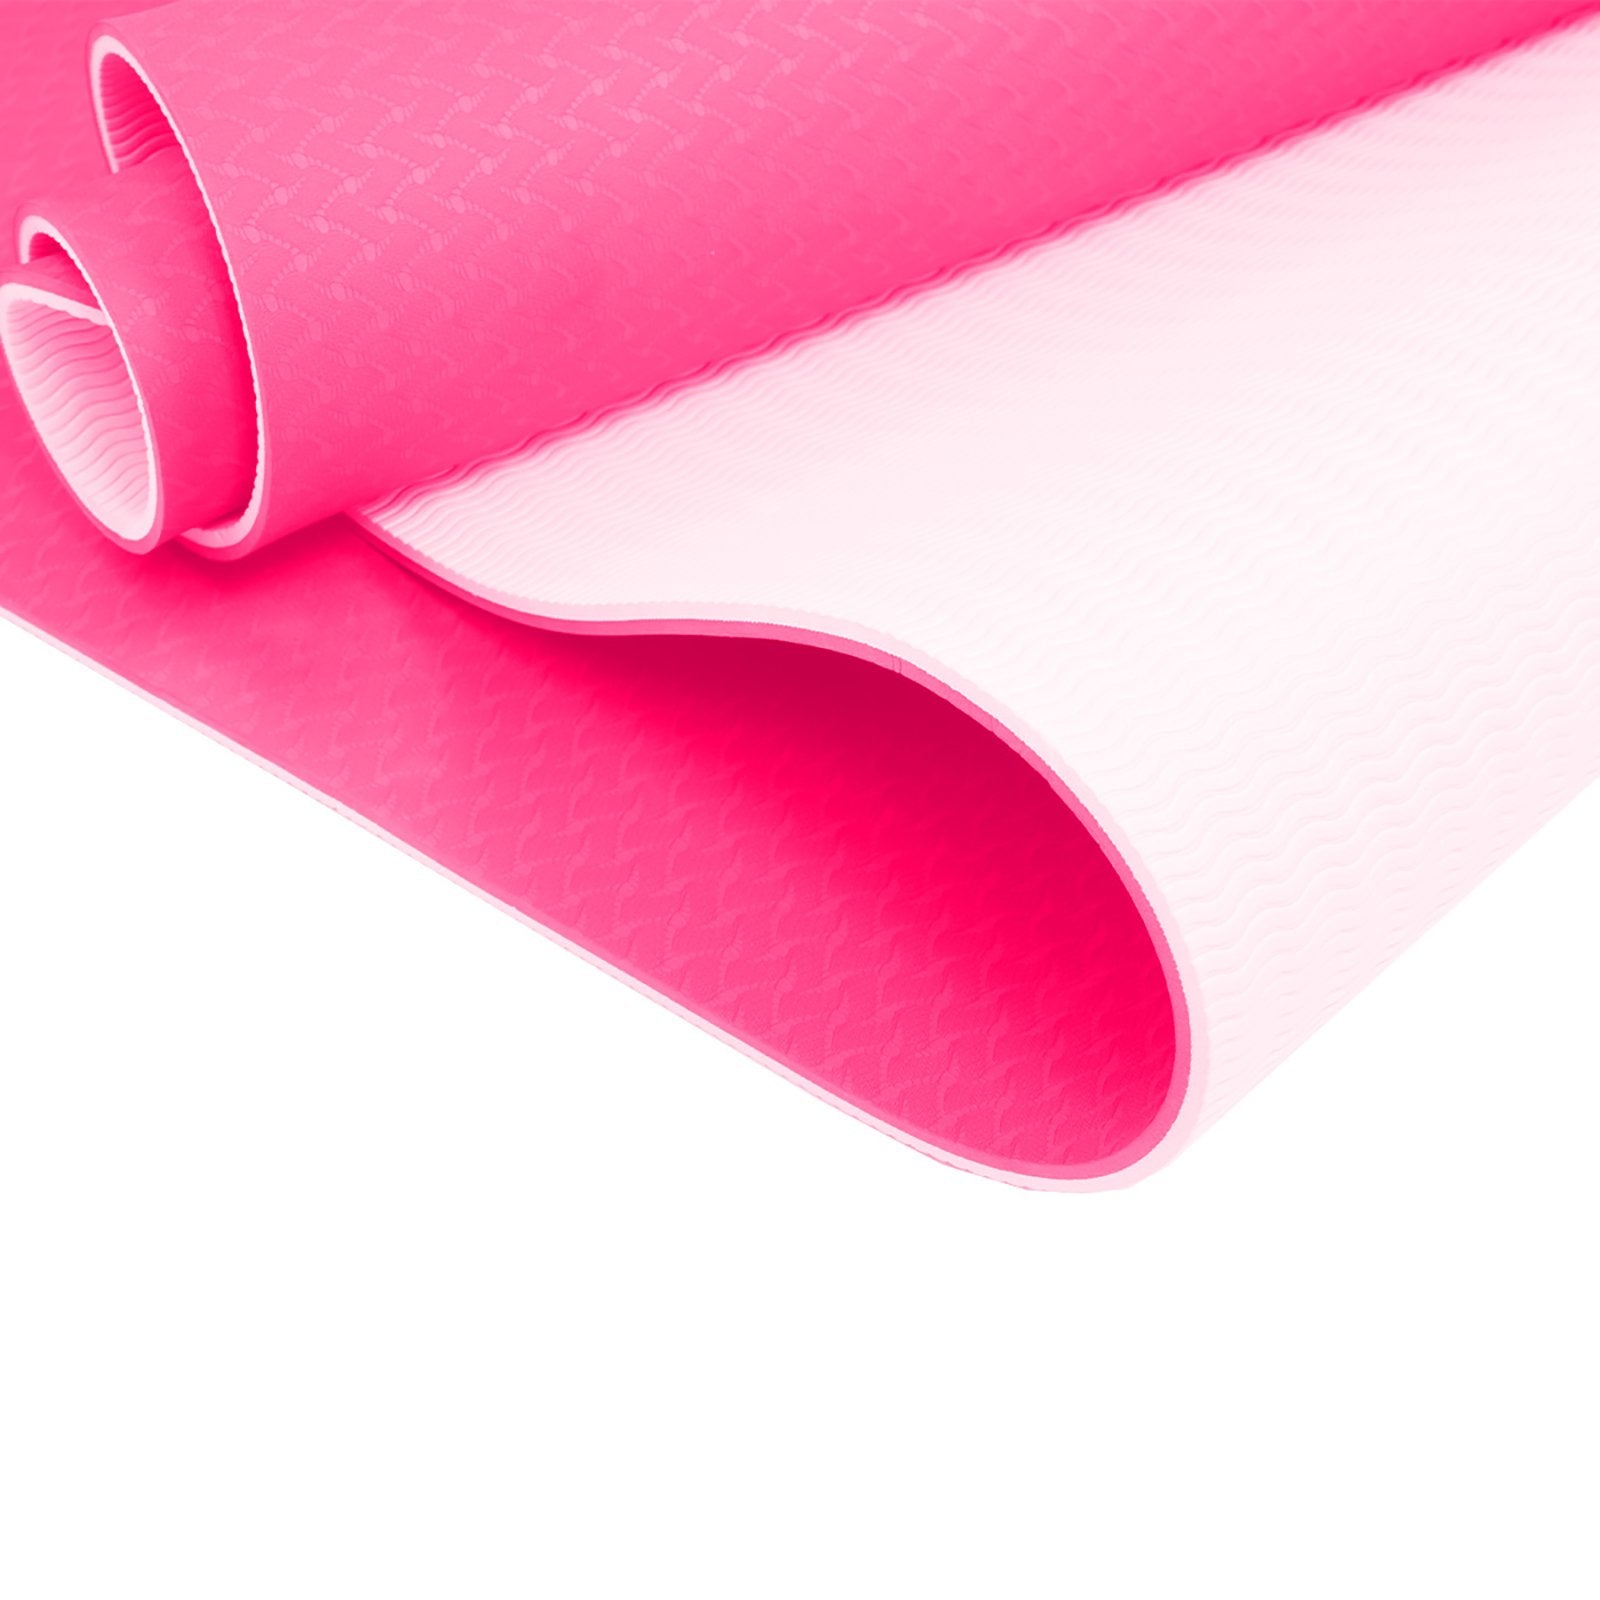 Powertrain Eco-friendly Dual Layer 8mm Yoga Mat | Hot Pink | Non-slip Surface And Carry Strap For Ultimate Comfort And Portability